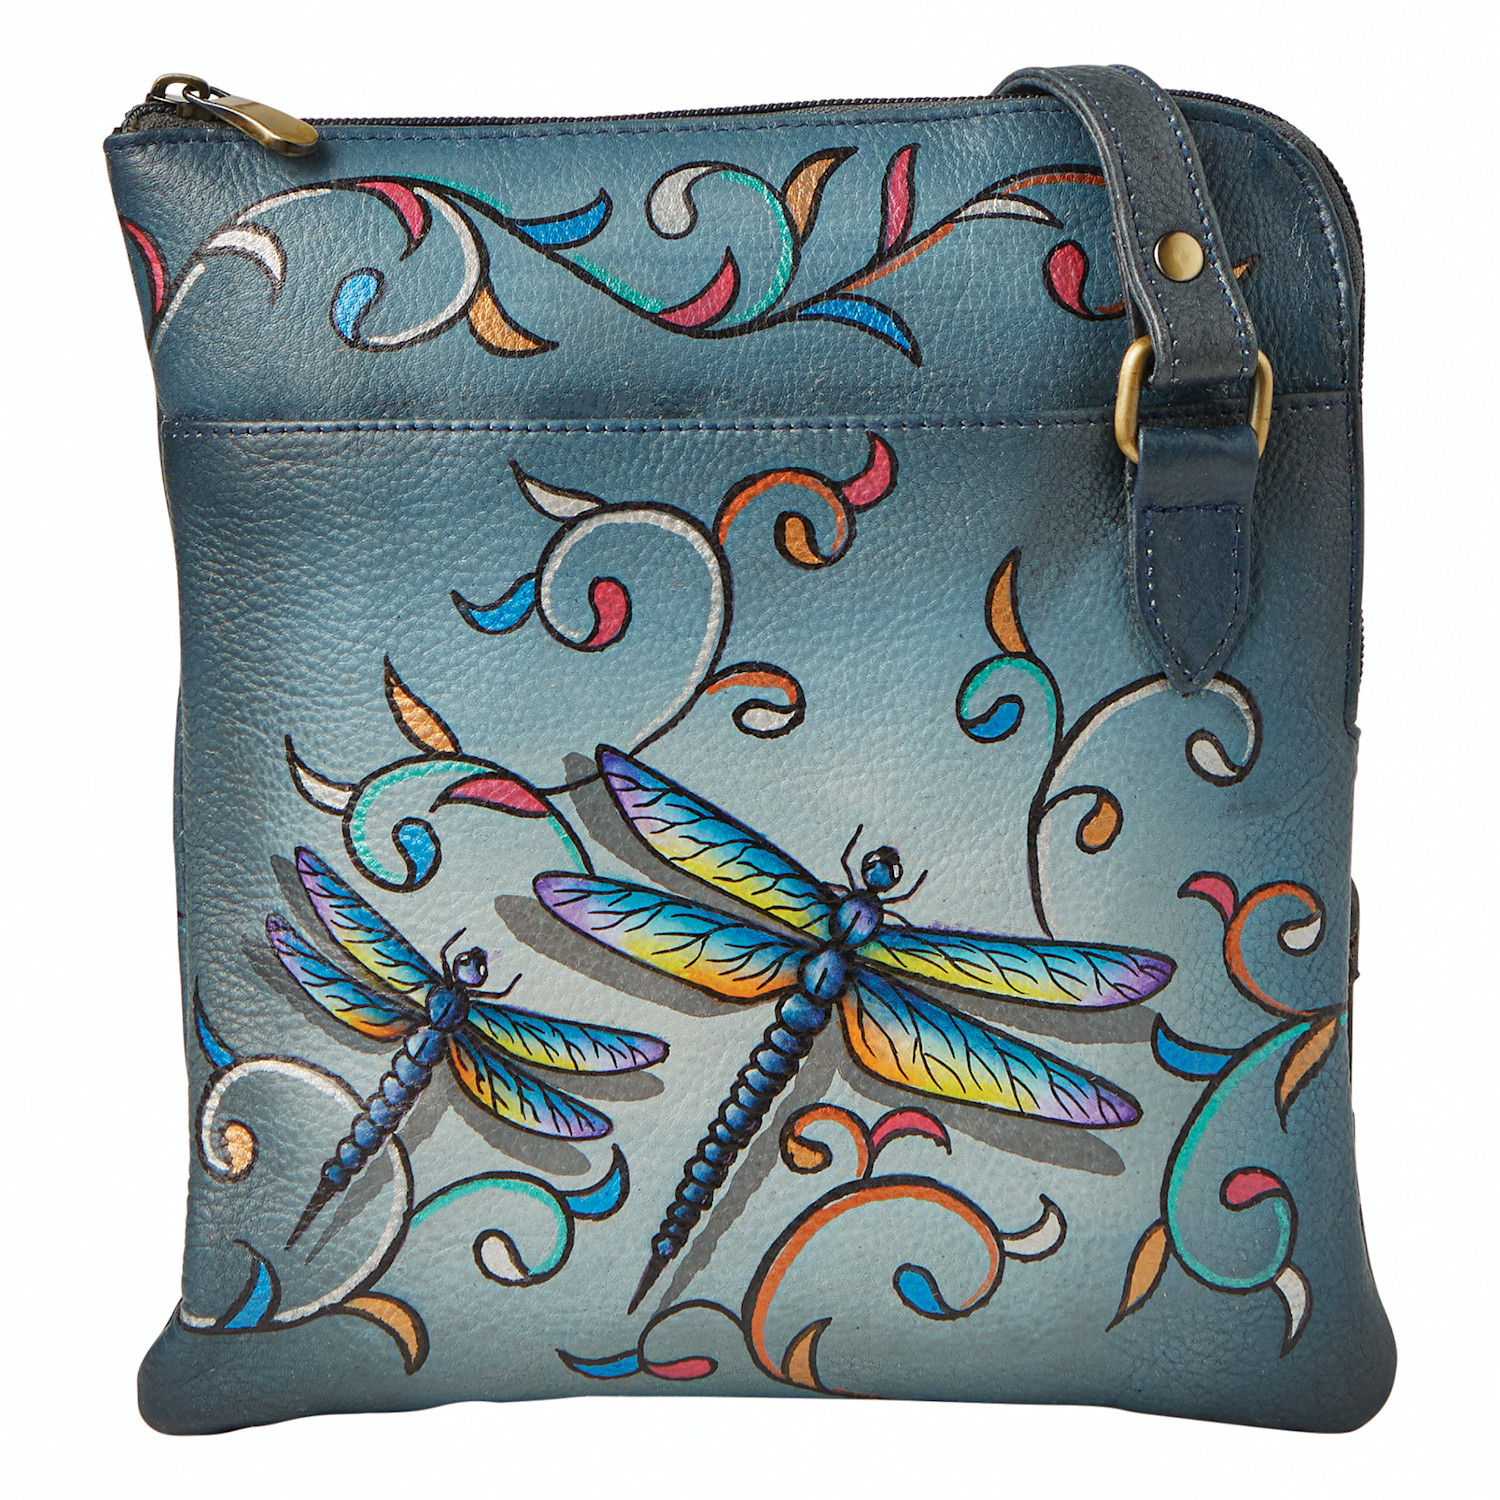 Floriana Hand Painted Dragonfly Shoulder Bag Leather Crossbody Strap Lined Purse | eBay